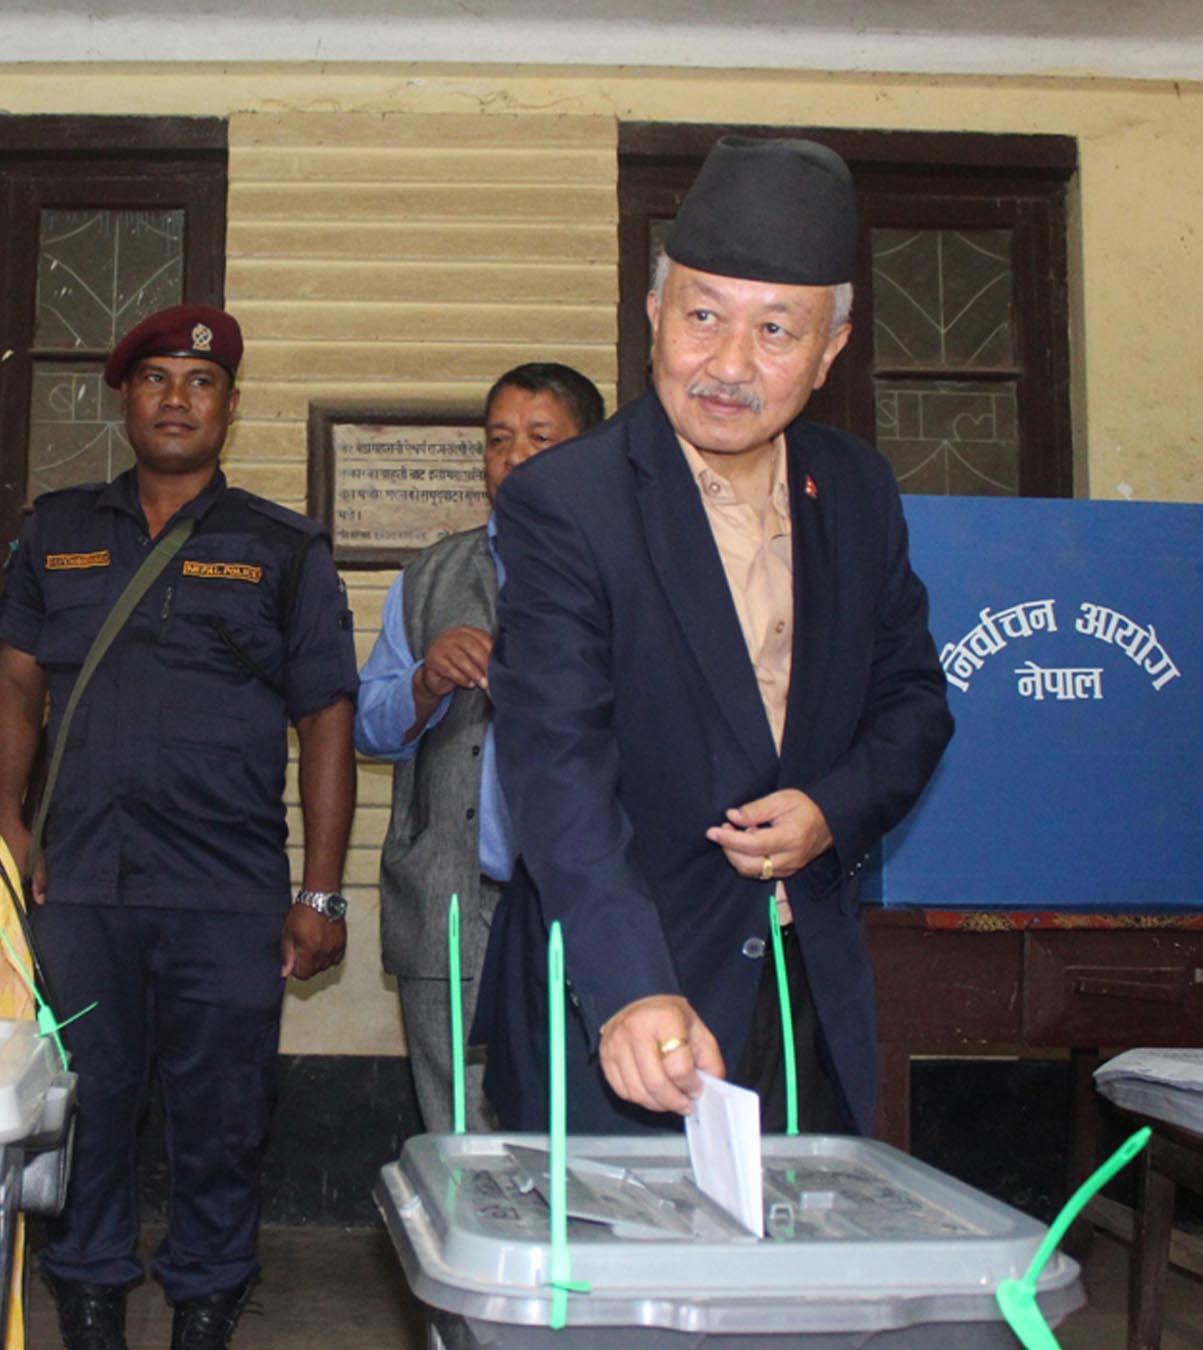 Deputy Parliamentary Party leader of CPN-UML Subash Nembang casts his vote at Balmandir Pre-primary school-based polling centre in Ilam Municipality-7 in Ilam on June 28, 2017. Photo: RSS